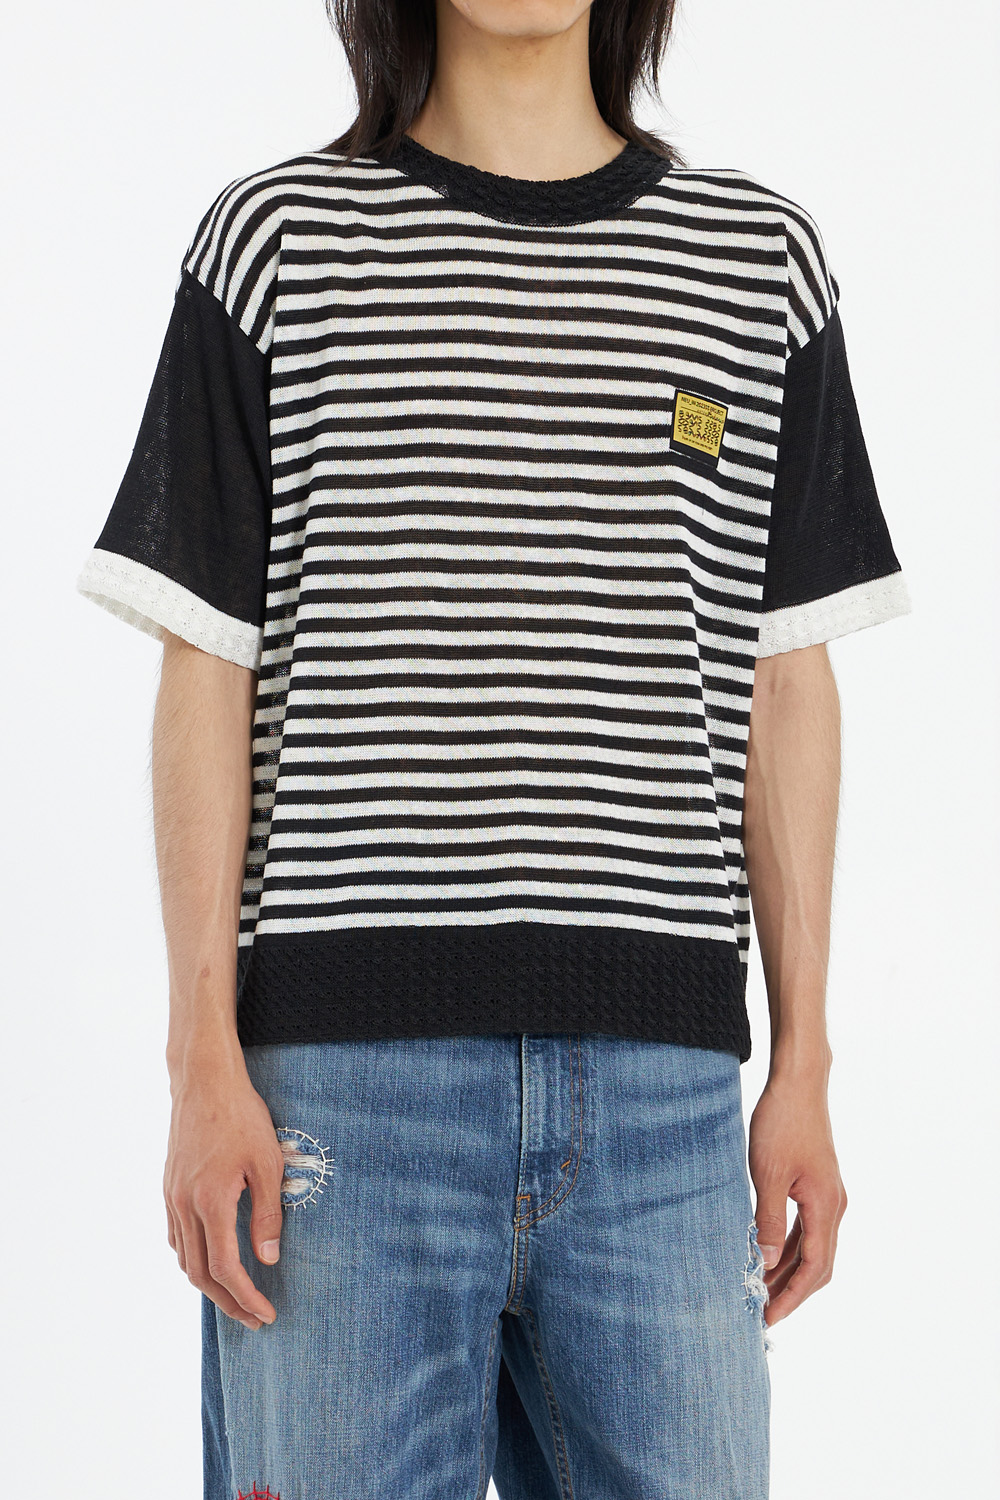 Stripe Knitted Linen T-Shirt_Charcoal Grey